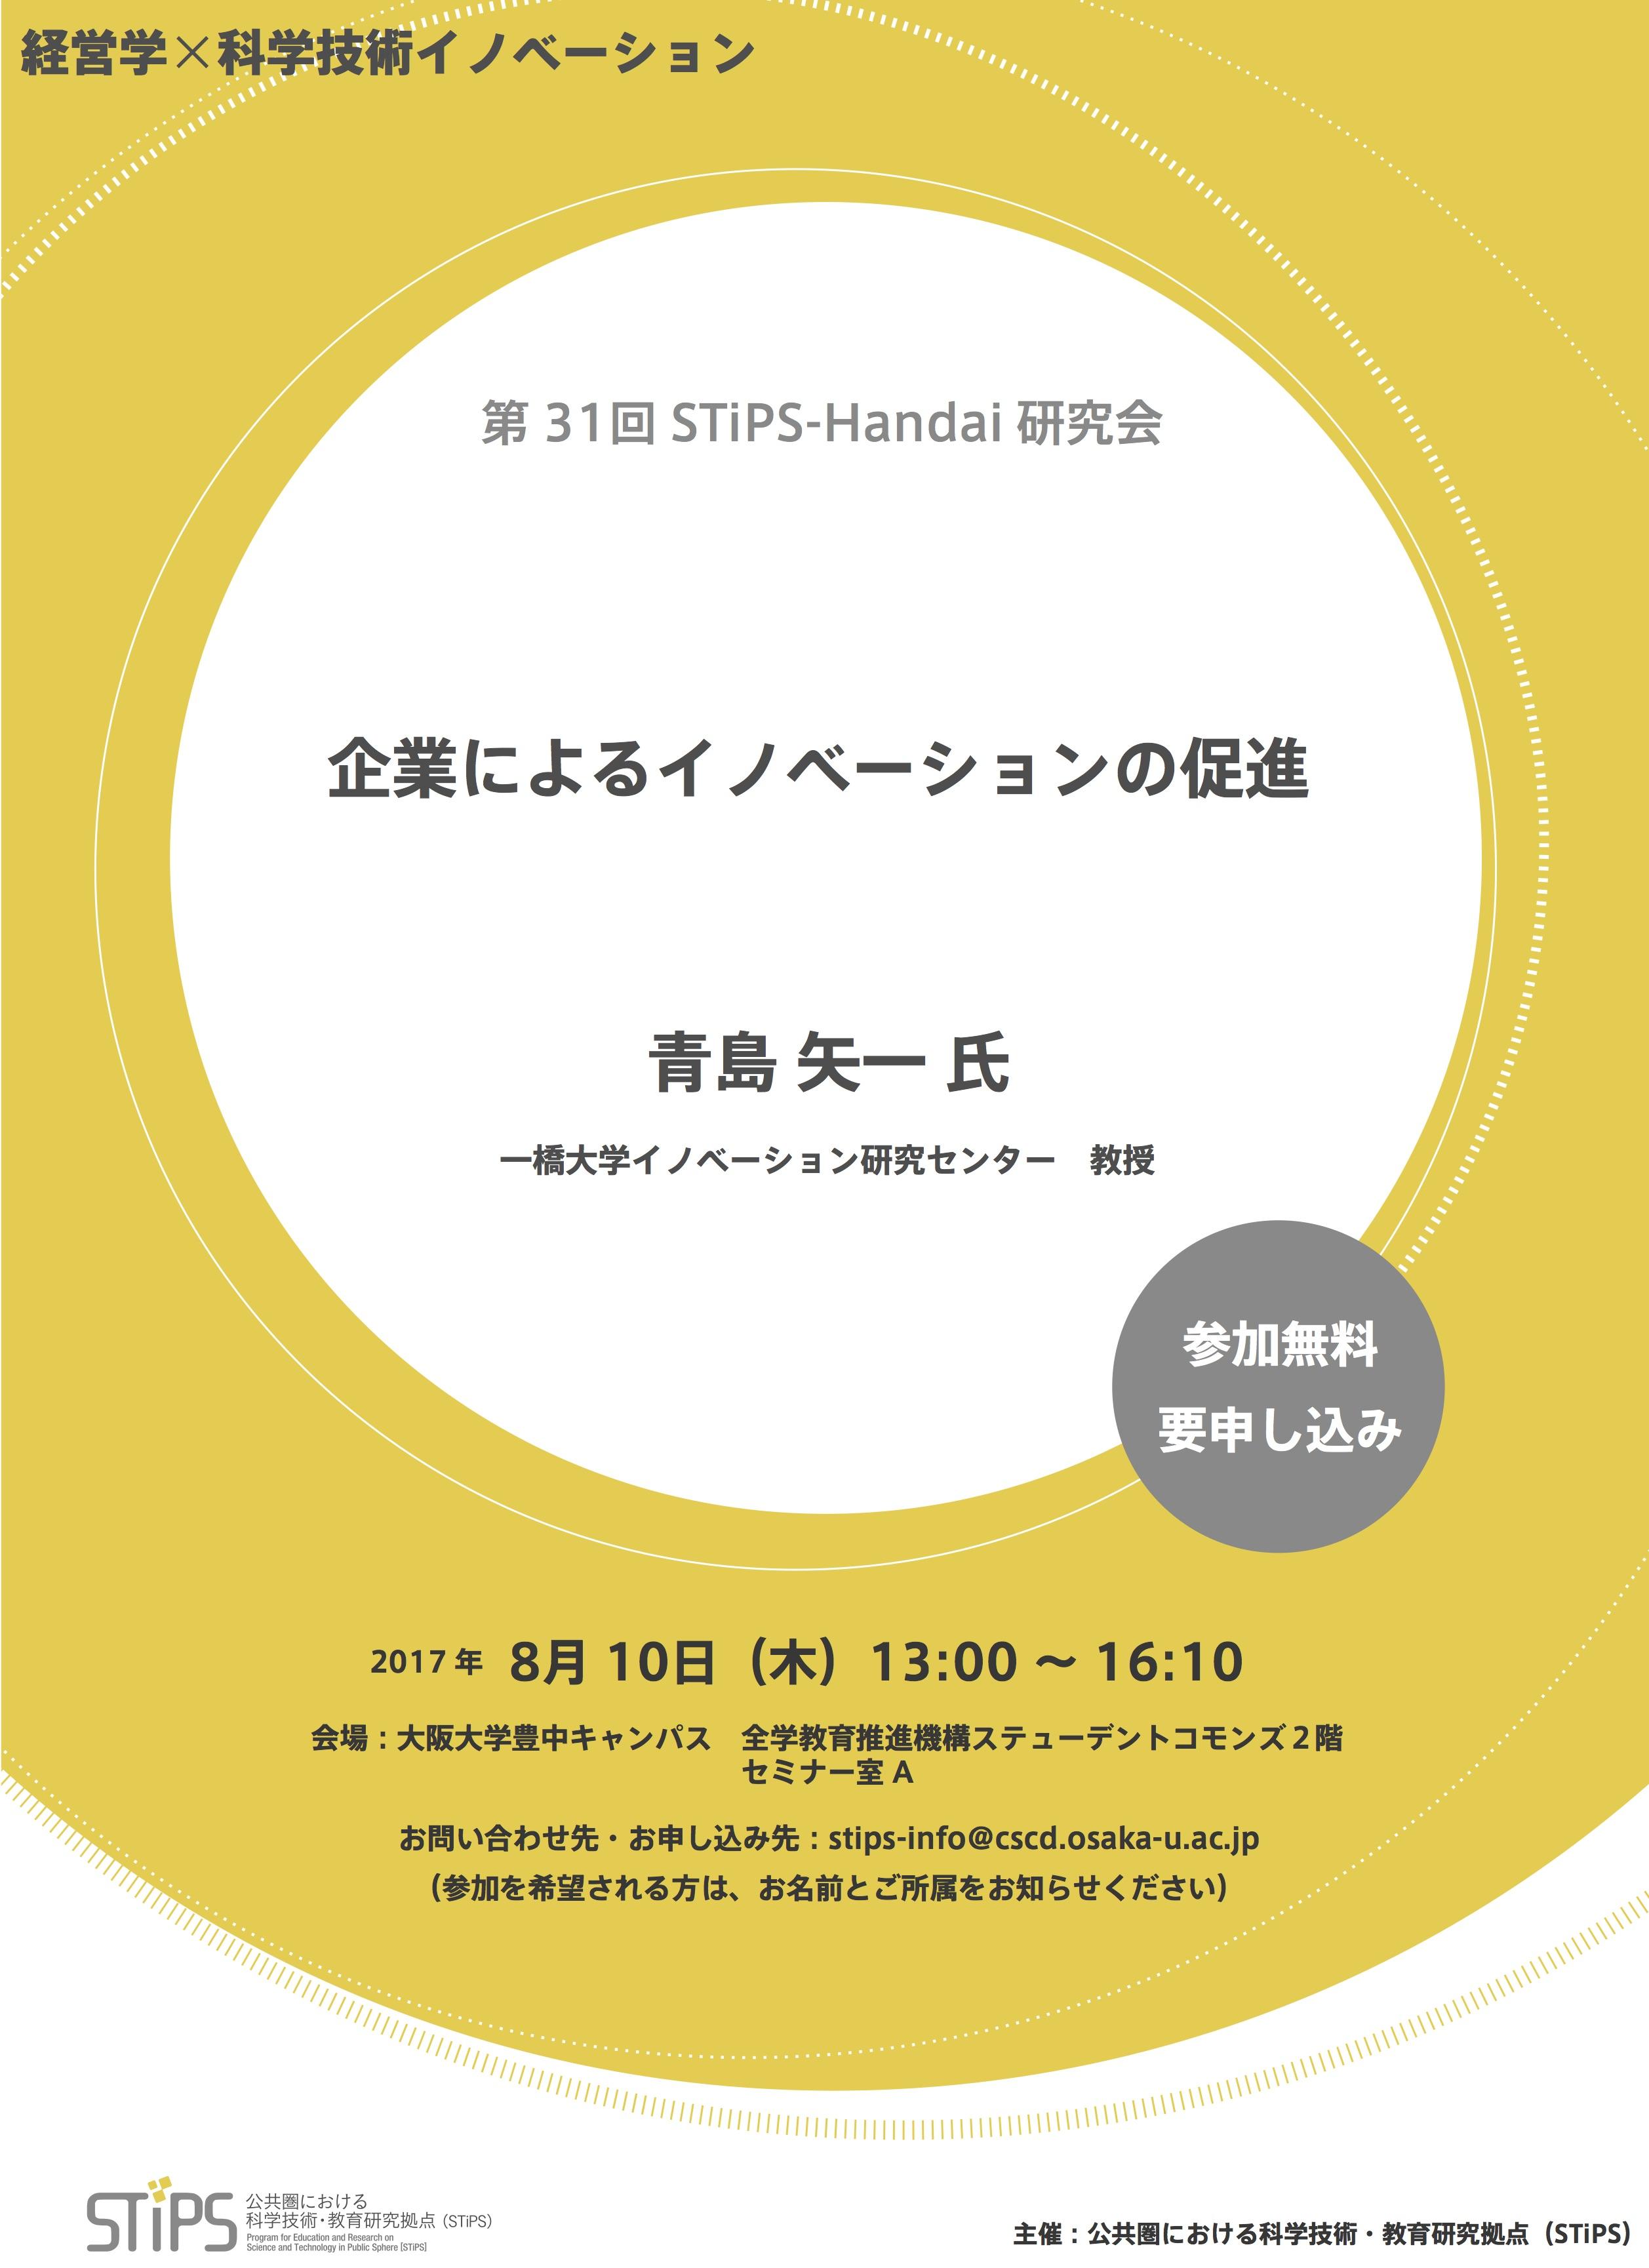 http://scirex.grips.ac.jp/events/STiPS-Handai_for170810.jpg